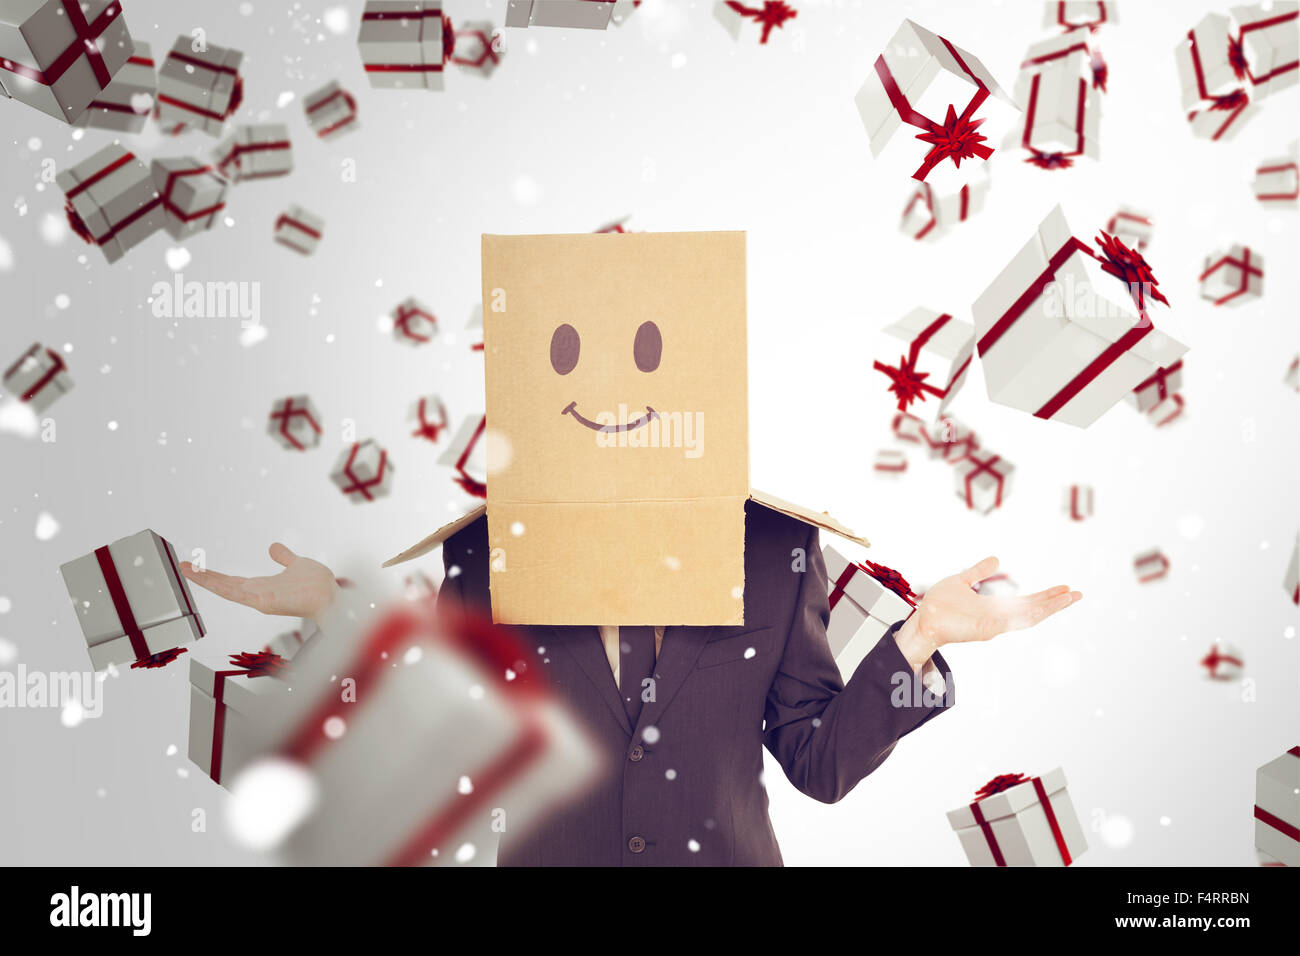 Composite image of businessman shrugging with box on head Stock Photo